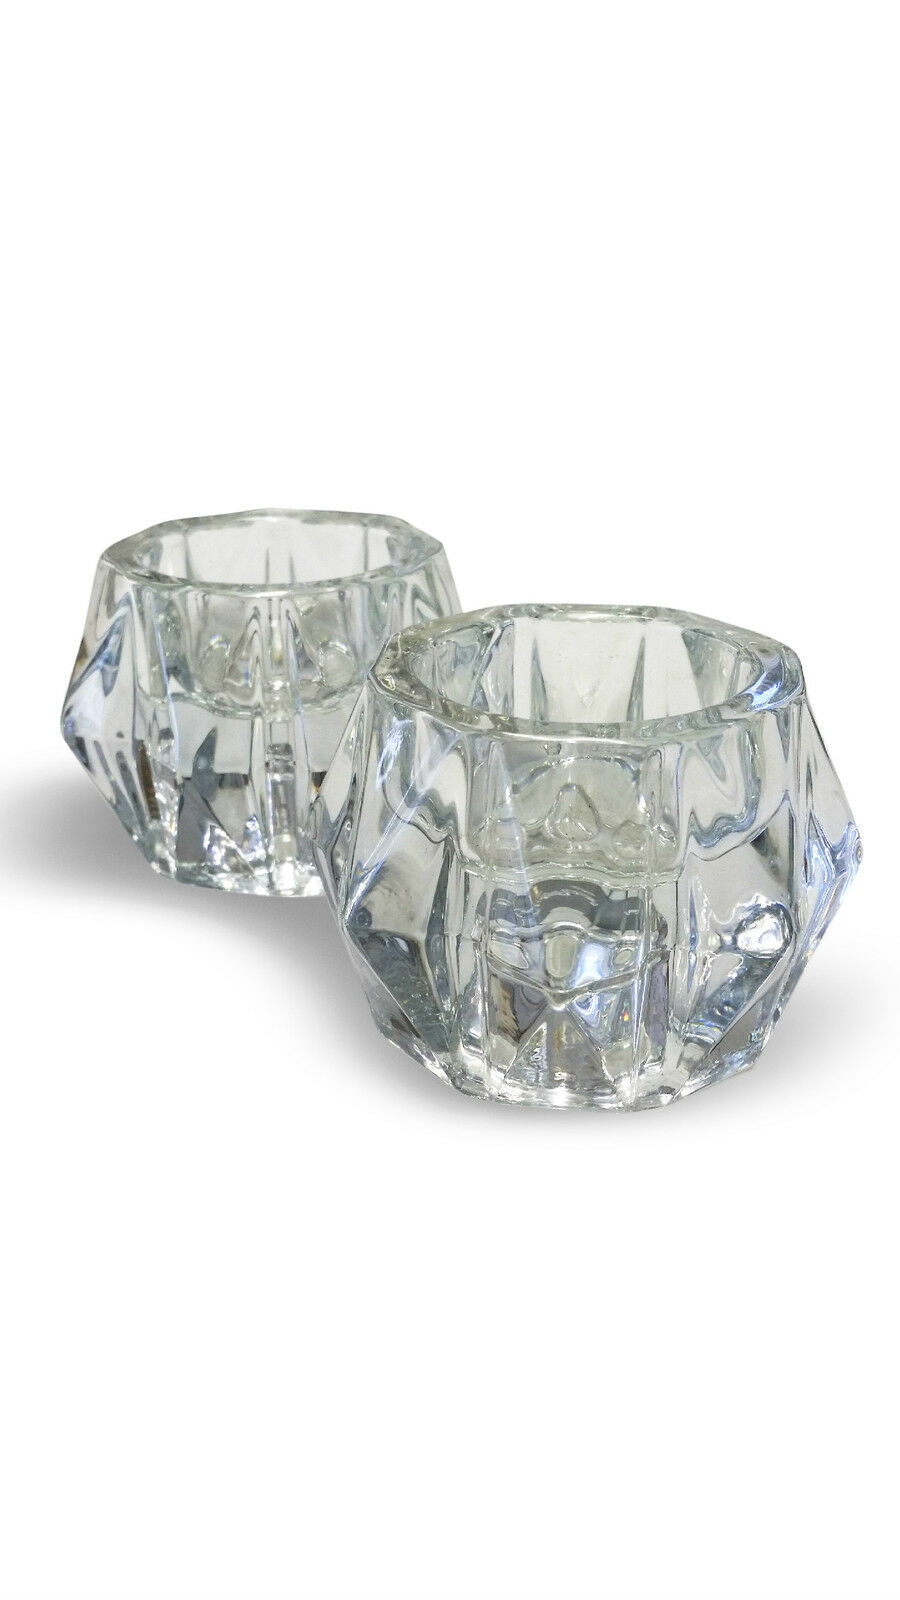 Libbey Heavy Glass Candleholders Versatility for Tapers or Tea Lights Set of 2 - $21.99